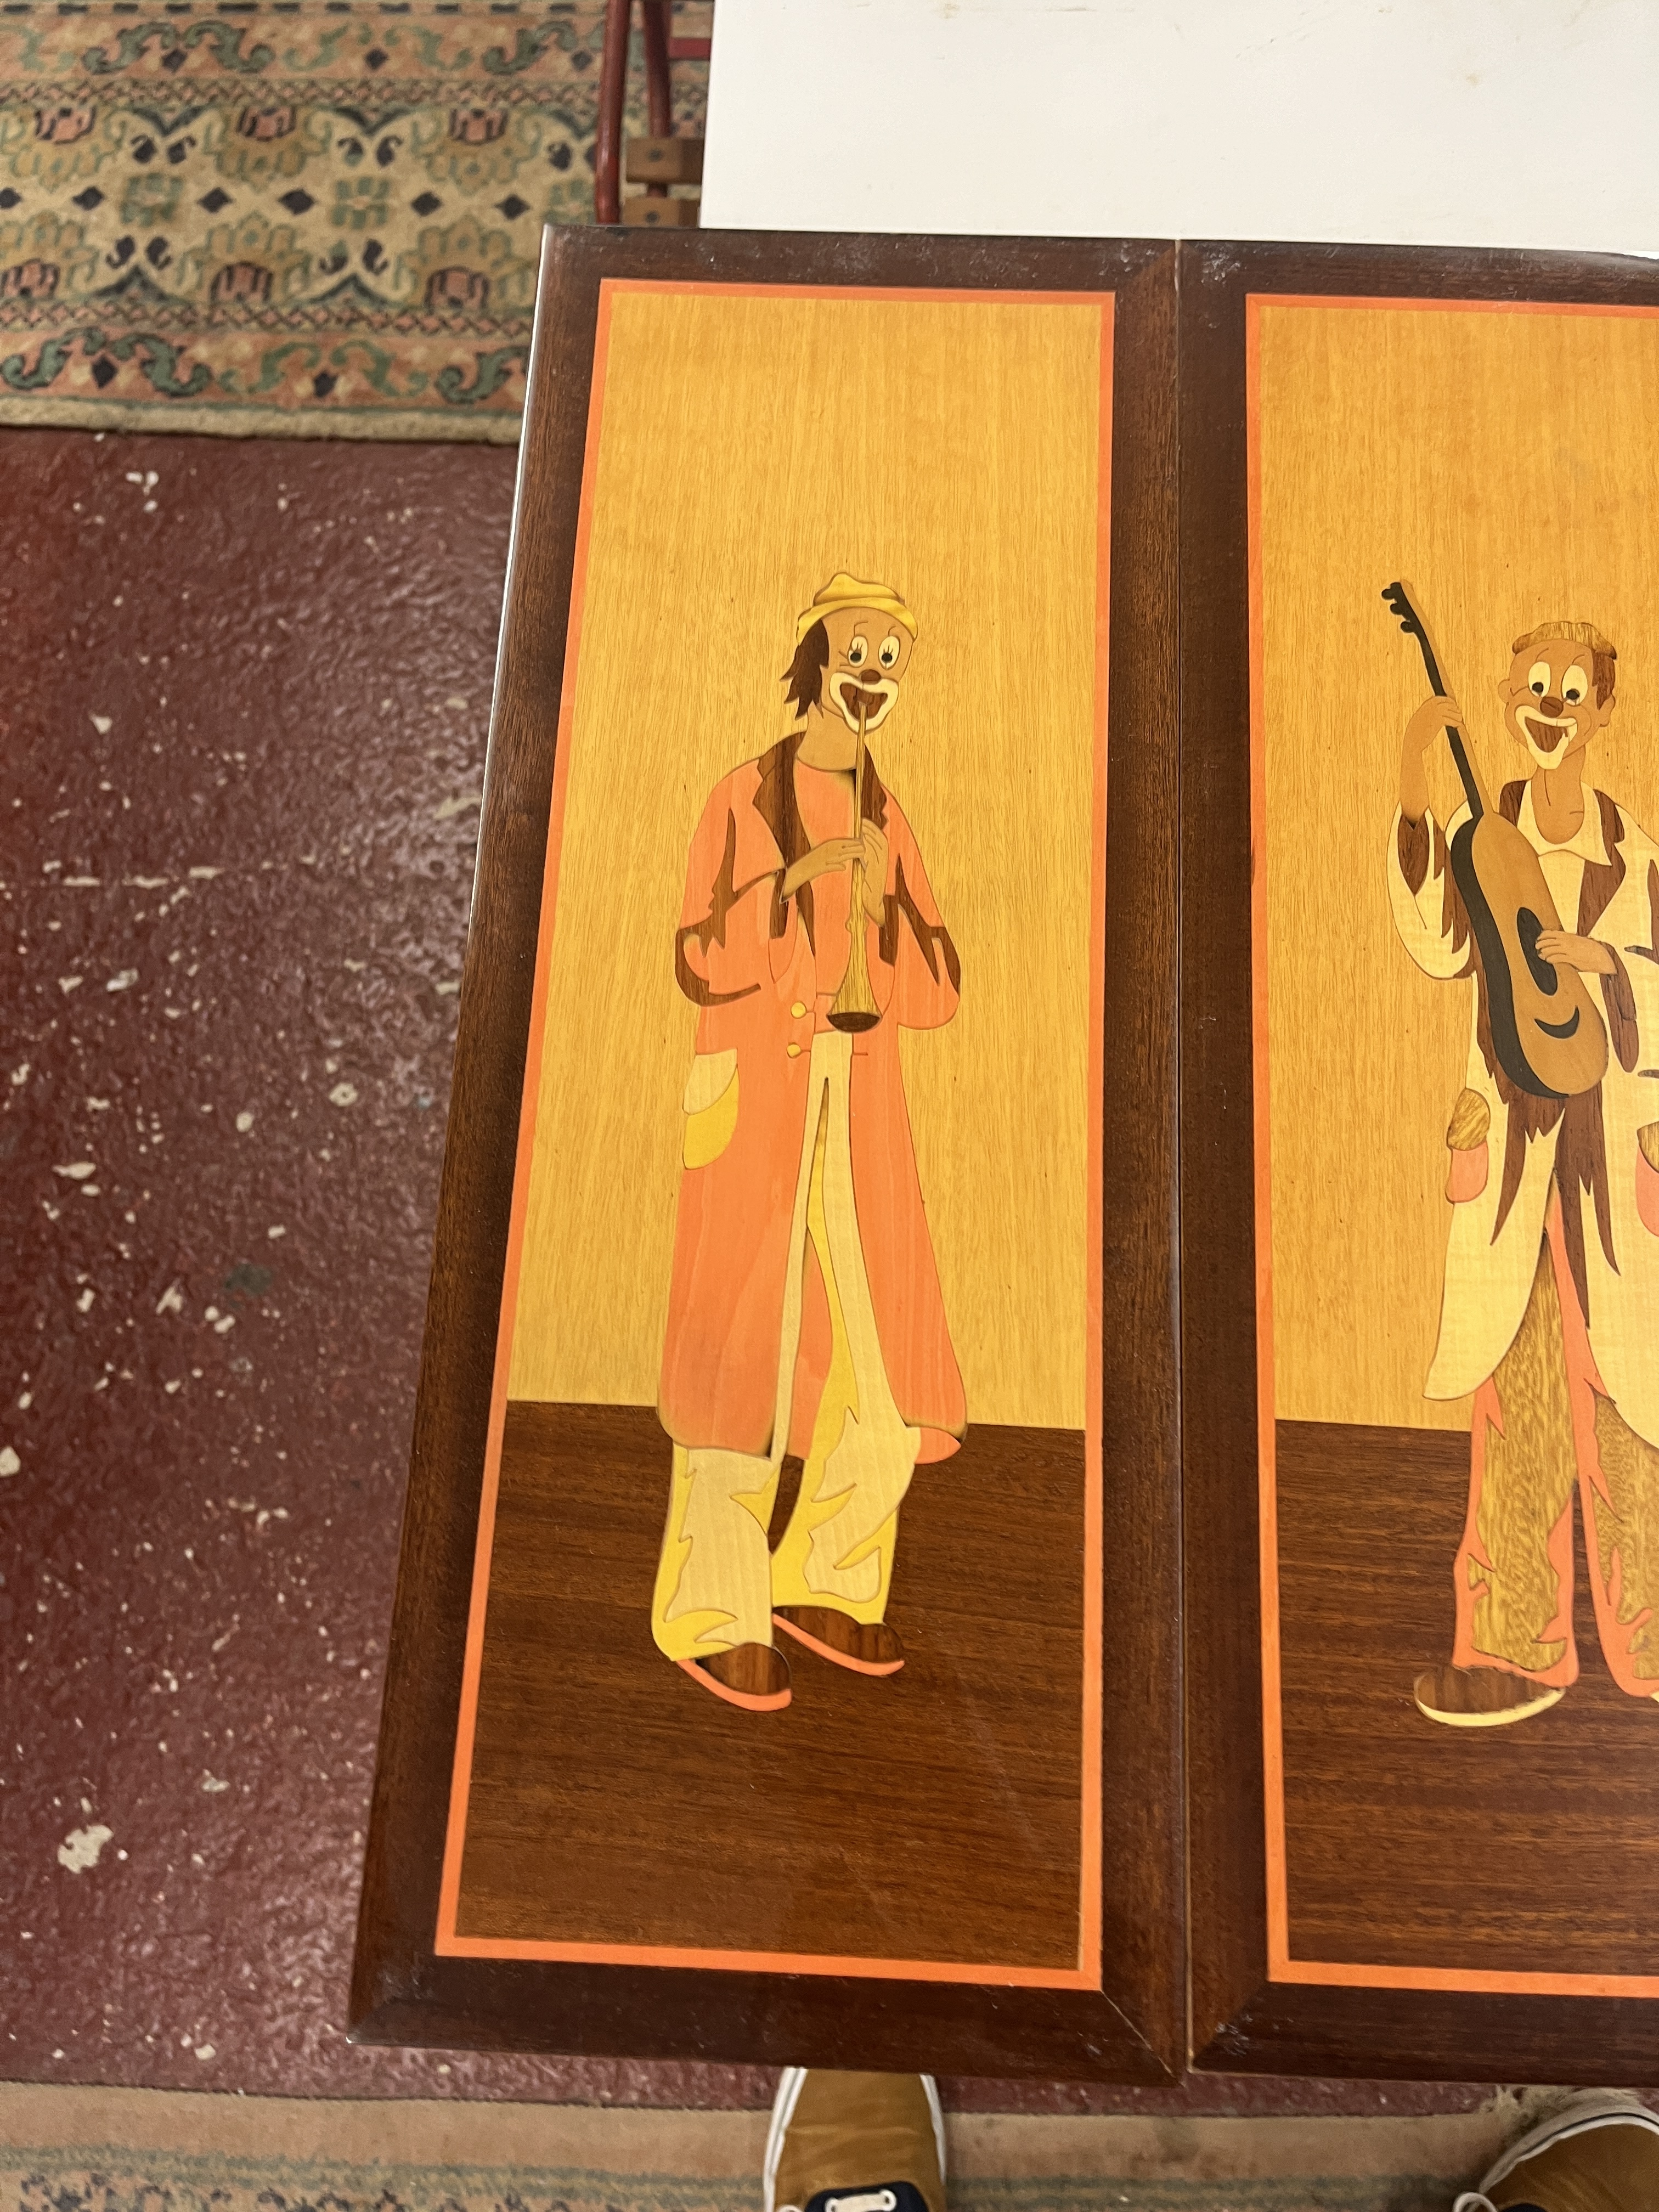 Set of 6 Italian marquetry wooden pictures of clowns - Image 7 of 7